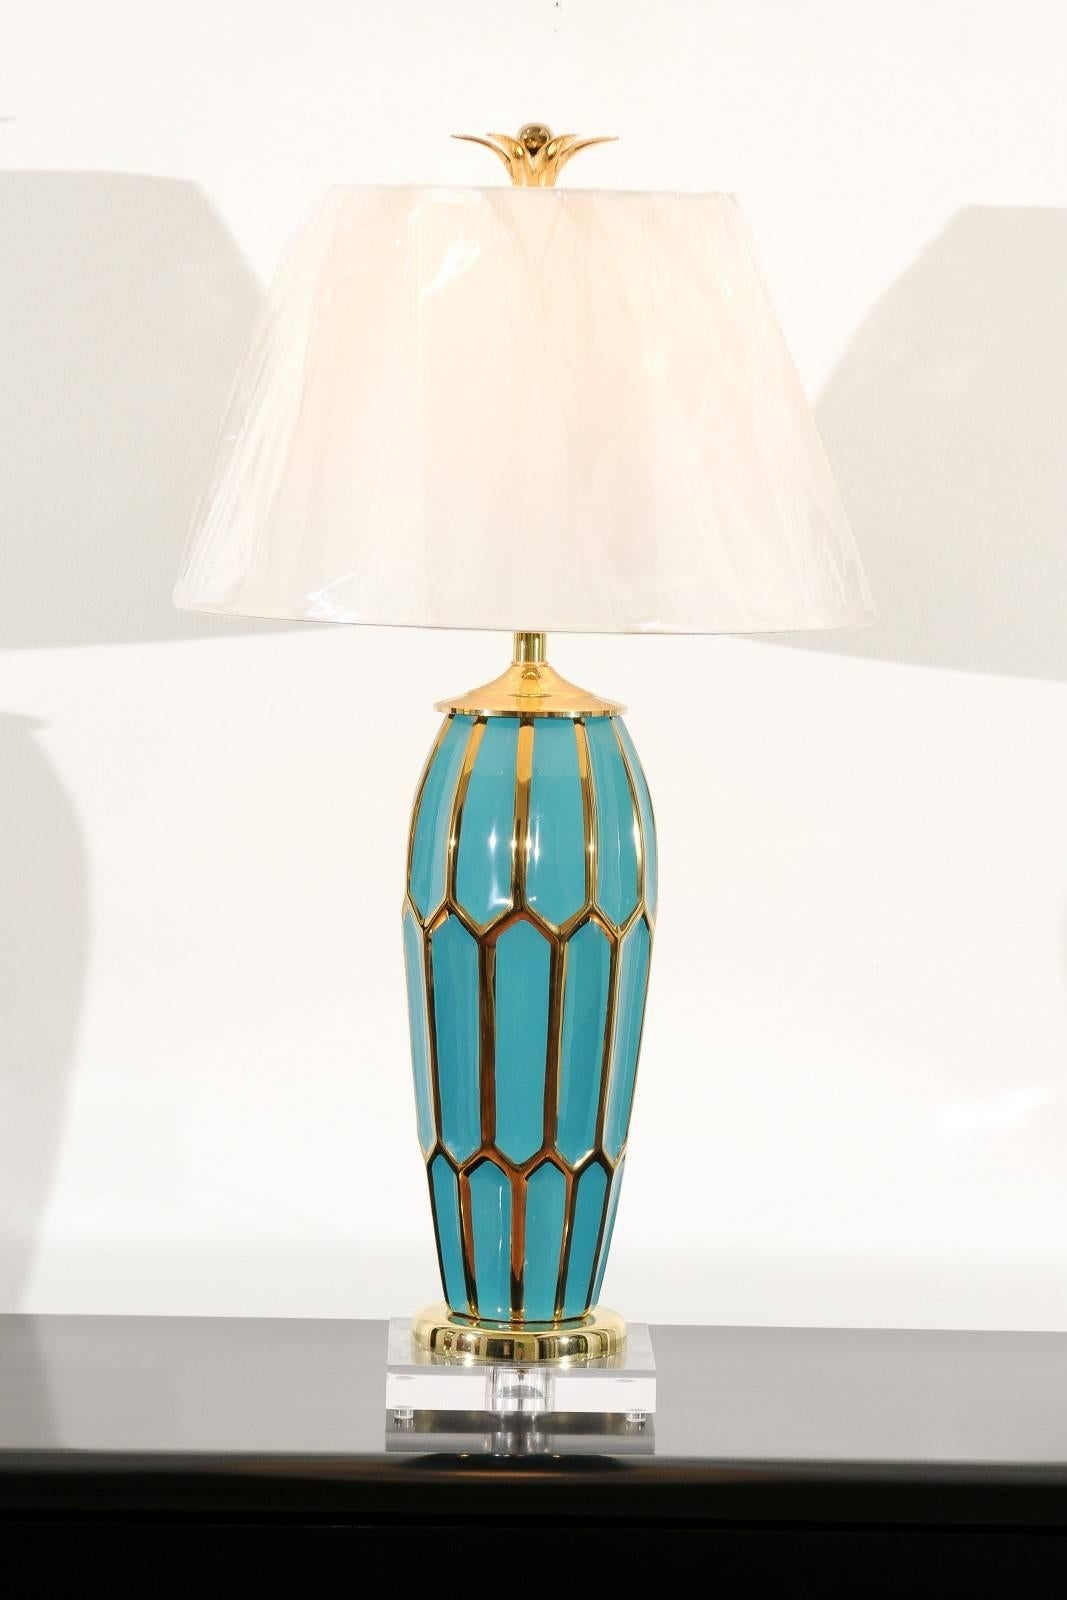 A stunning pair of ceramic vessels as custom-made lamps. Beautiful turquoise form with geometric motifs highlighted in gold. Accents in Lucite and solid brass. Custom-made brass petal and ball finials send the pair over-the-top. Incredible